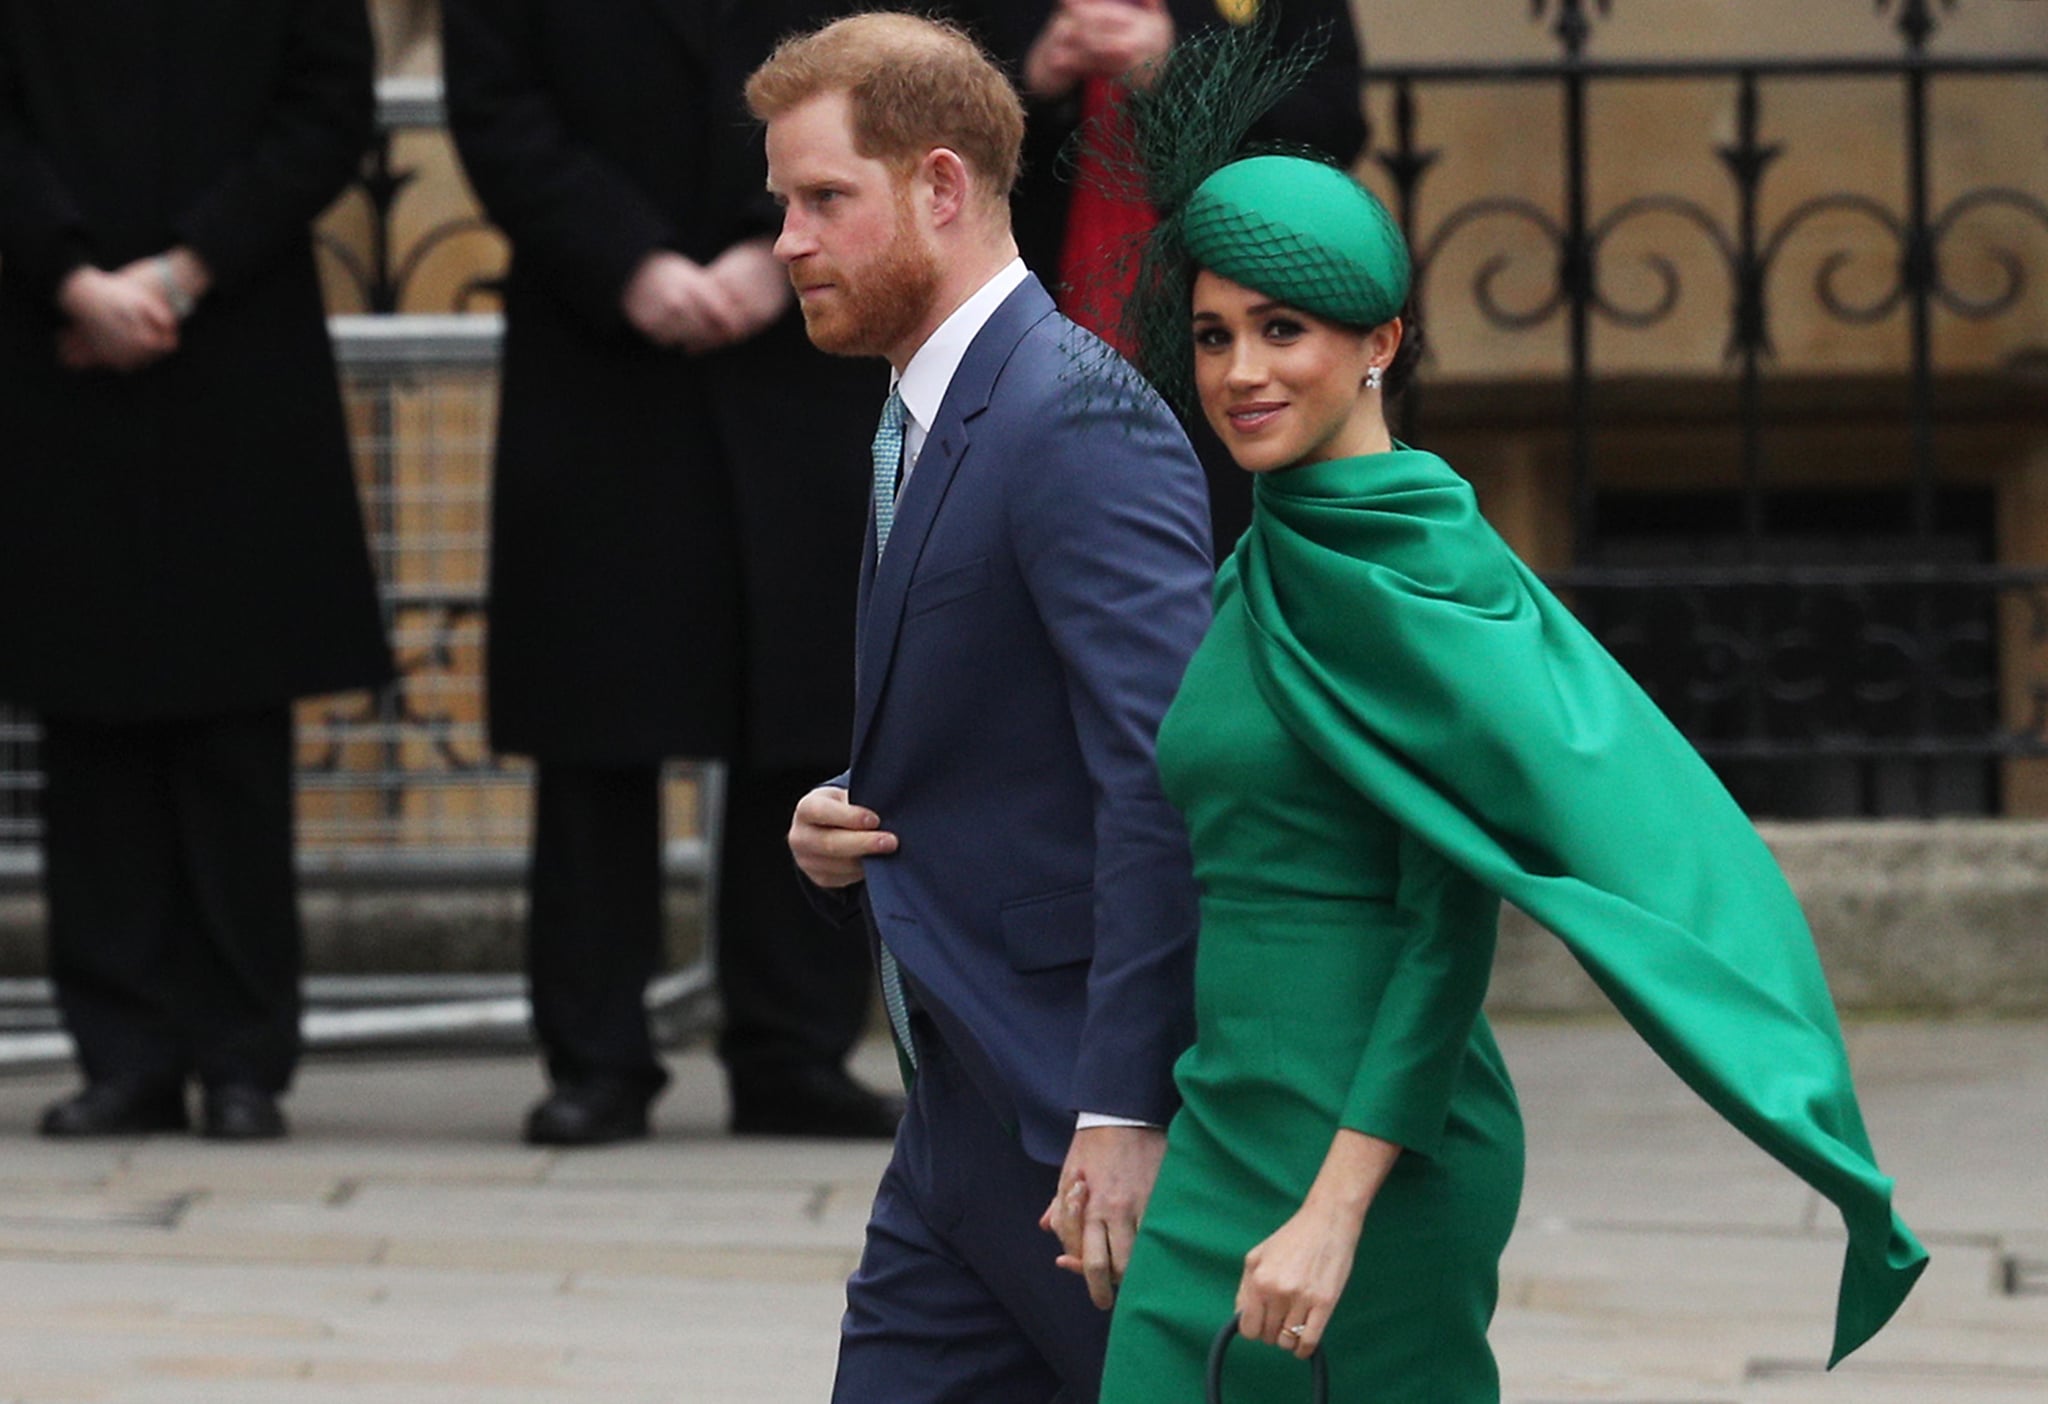 LONDON, ENGLAND - MARCH 09:  Prince Harry, Duke of Sussex (L) and Meghan, Duchess of Sussex arrive to attend the annual Commonwealth Day Service at Westminster Abbey on March 9, 2020 in London, England. (Photo by Dan Kitwood/Getty Images)